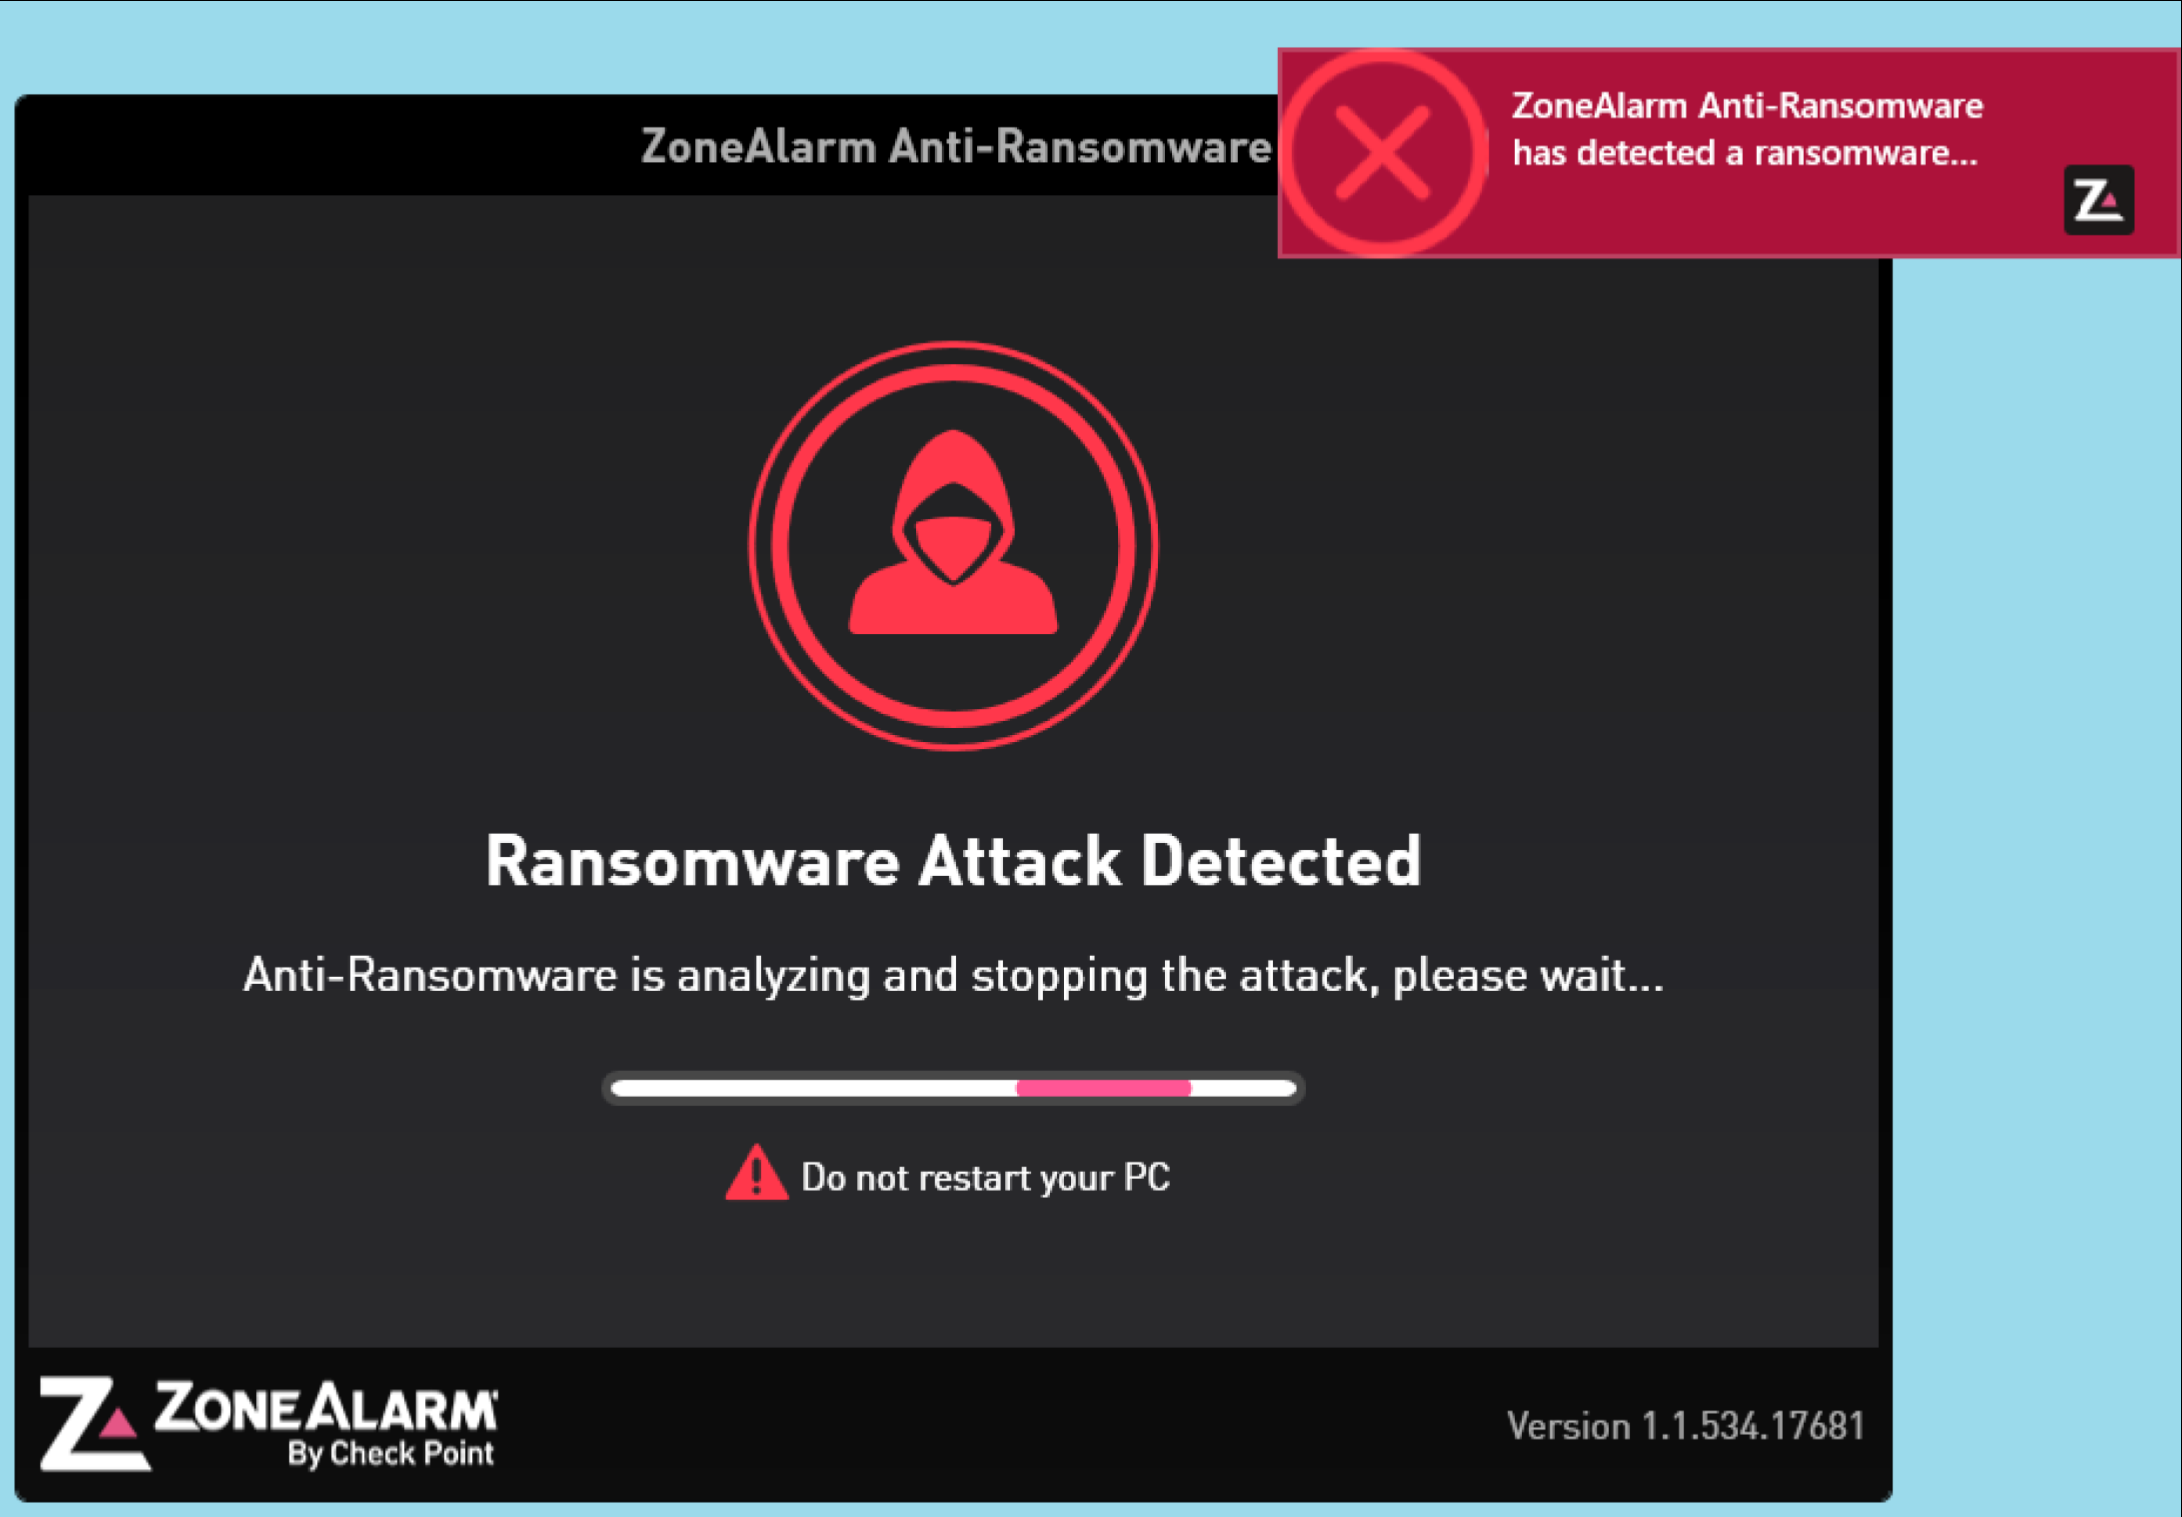 The ZoneAlarm Anti-Ransomware software.